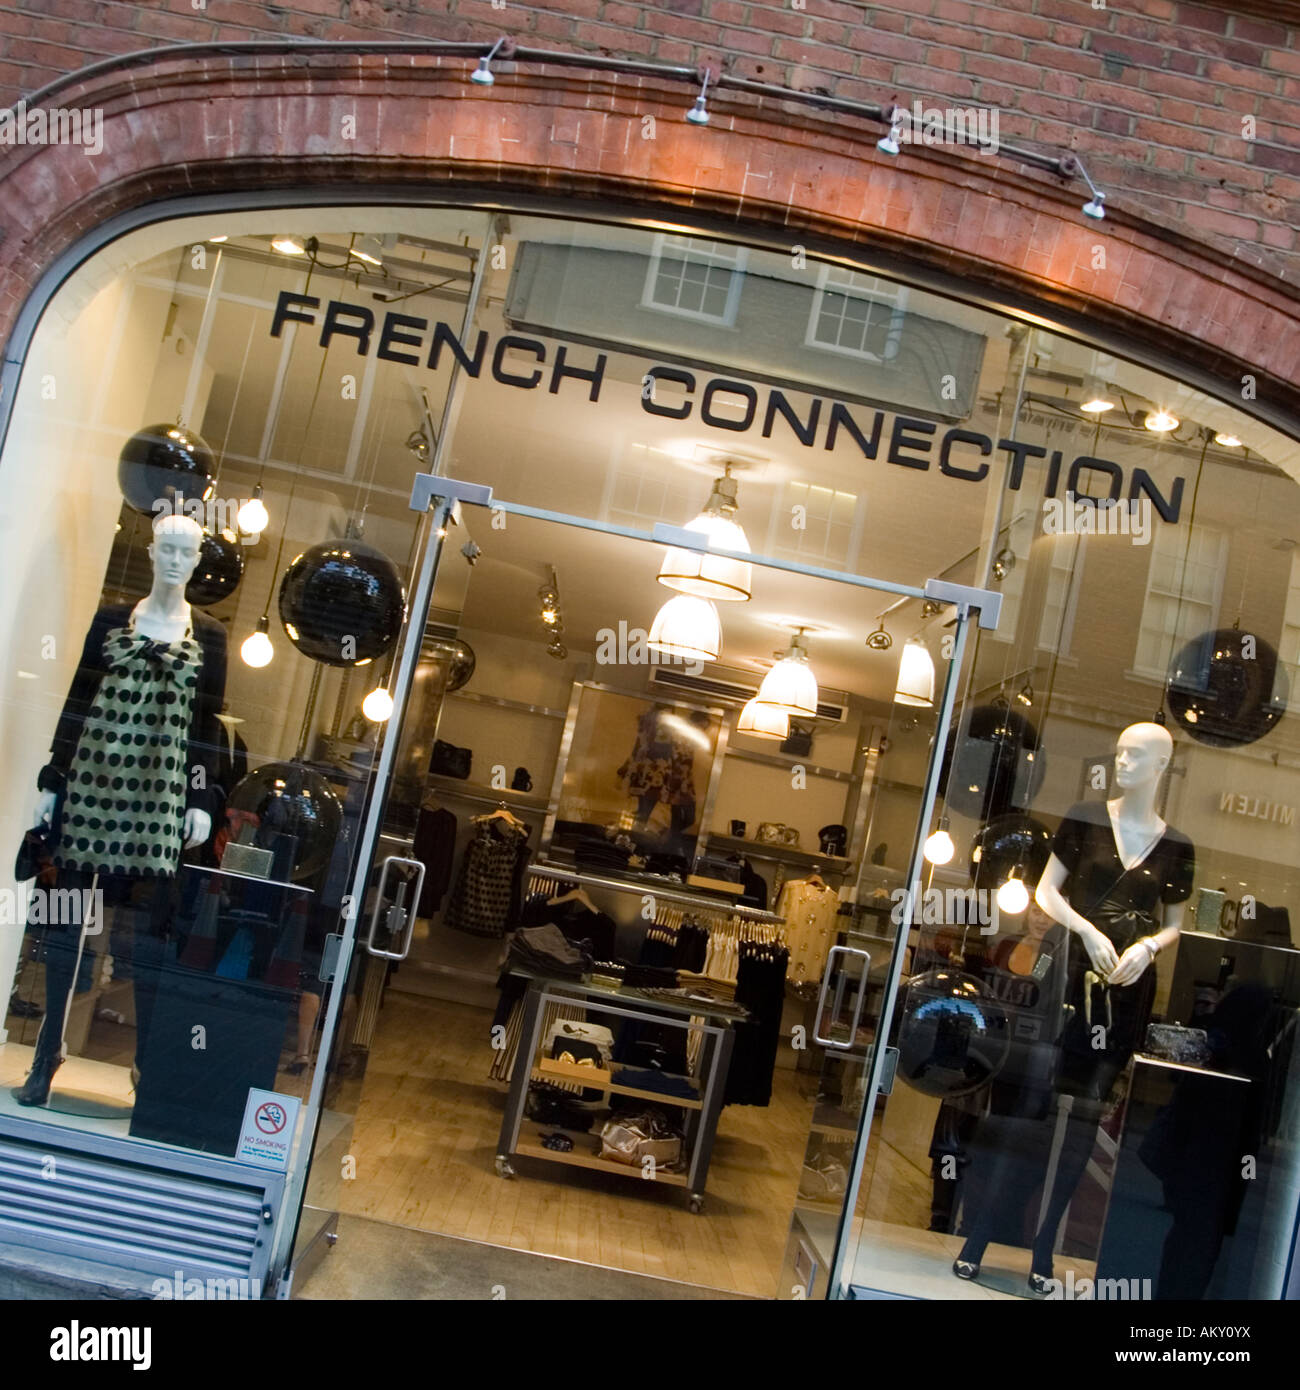 Exterior of French Connection shop, Covent Garden London Stock Photo